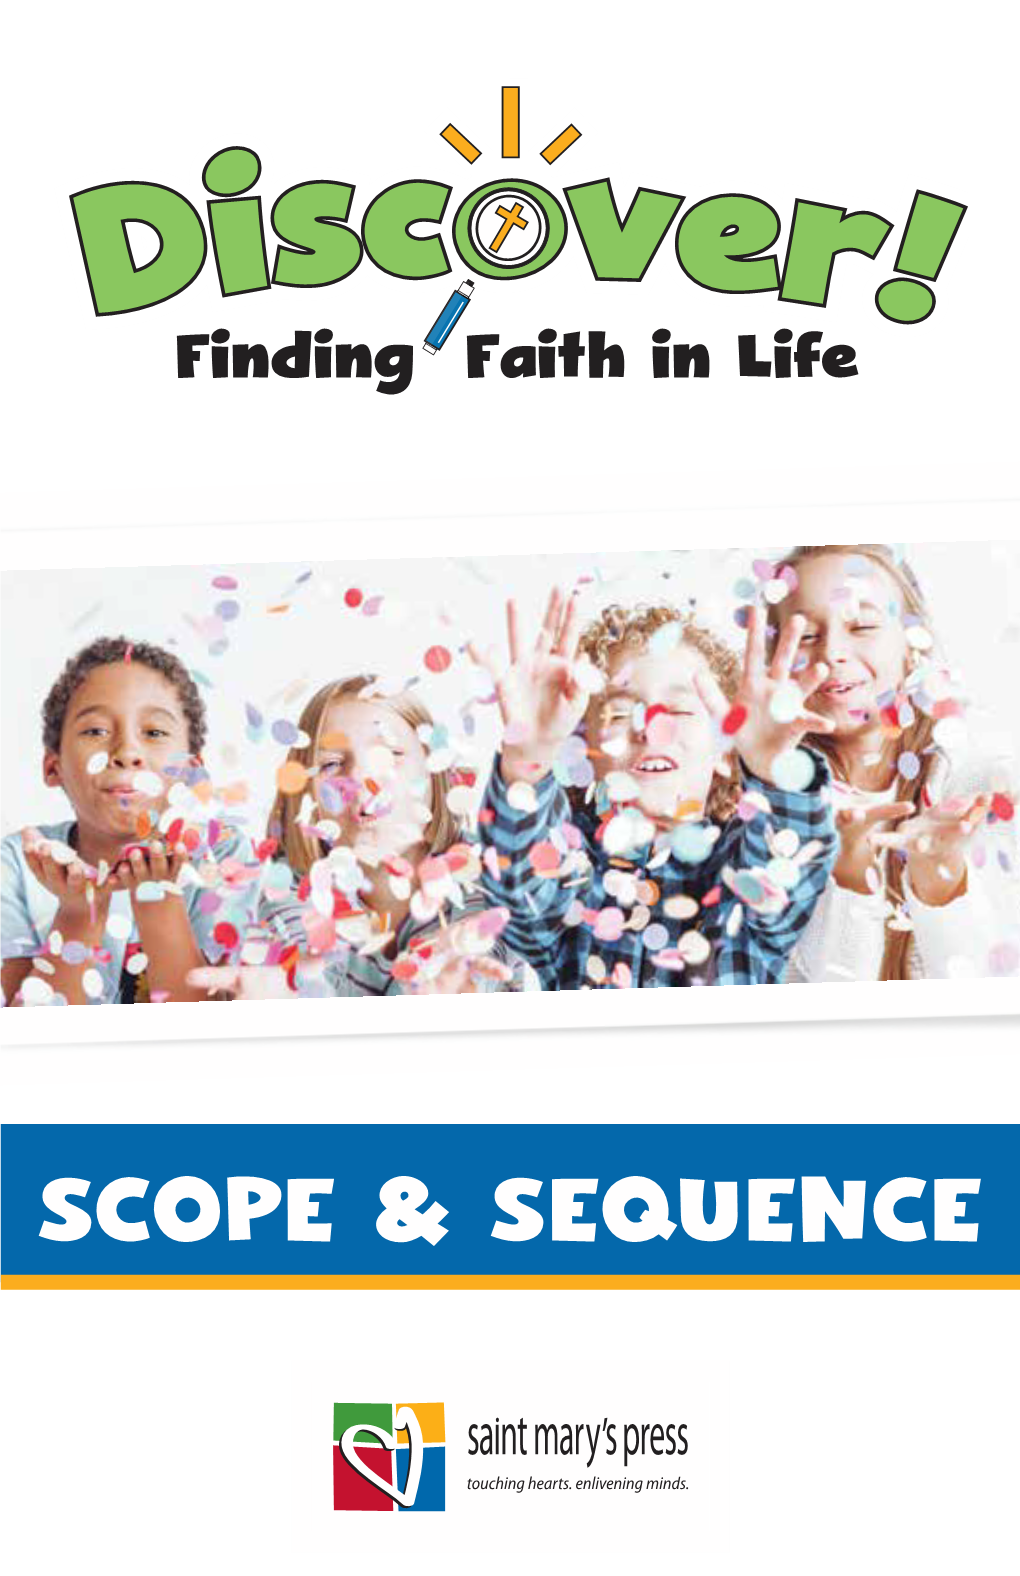 Scope & Sequence